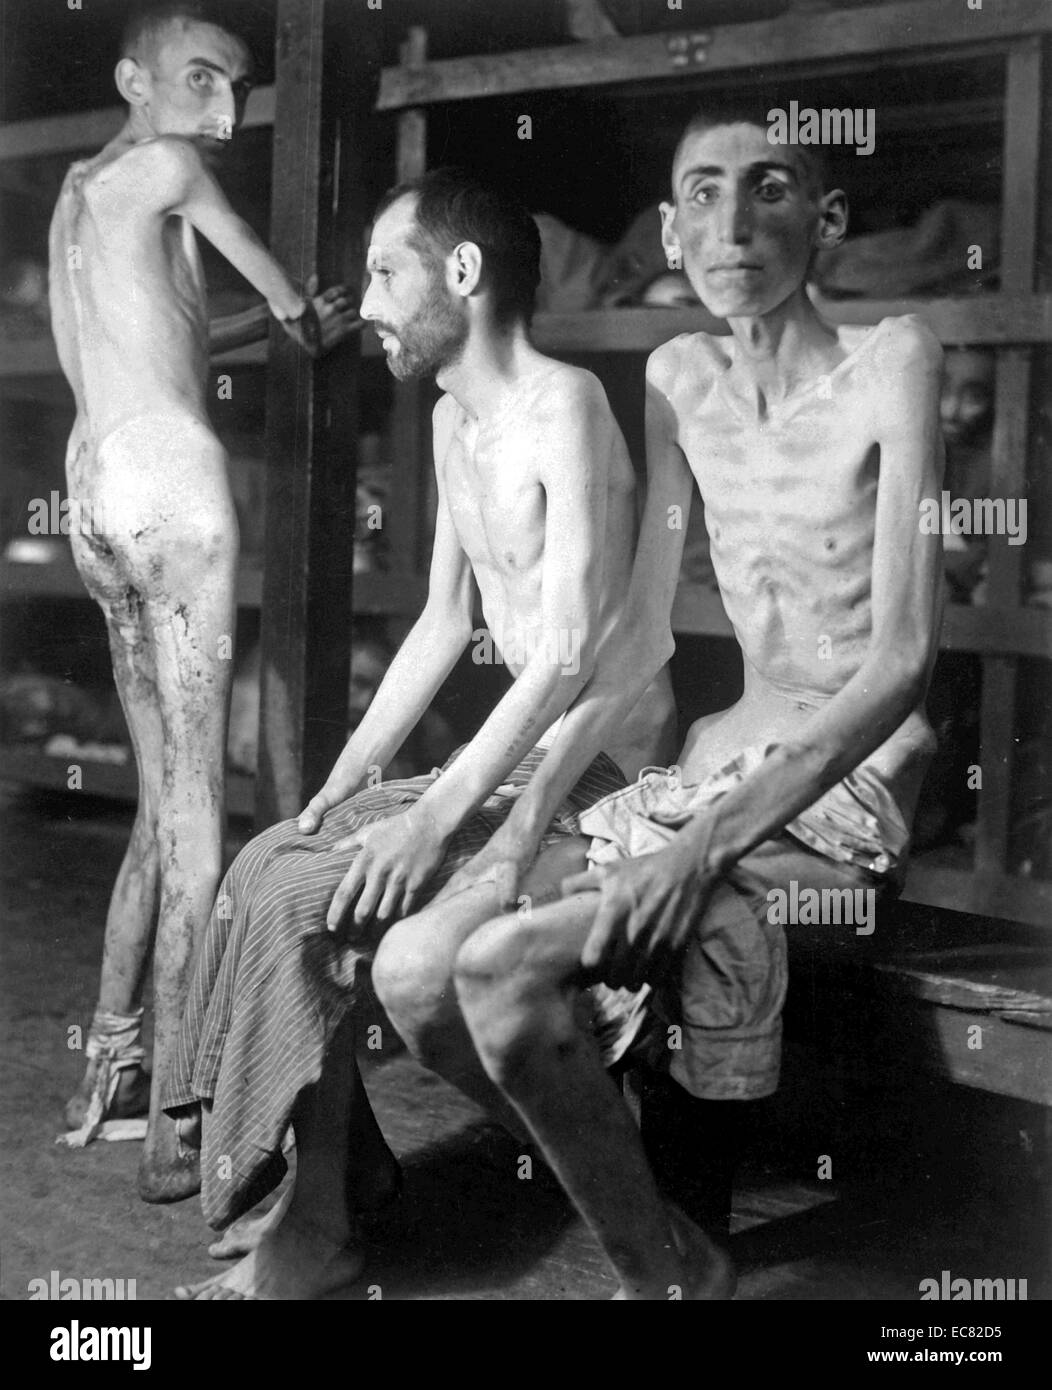 Image shows three prisoners of war at the Buchenwalk concentration camp. They're said to be Russian, Polish, and Dutch. Dated around 1944 during the Second World War. Stock Photo